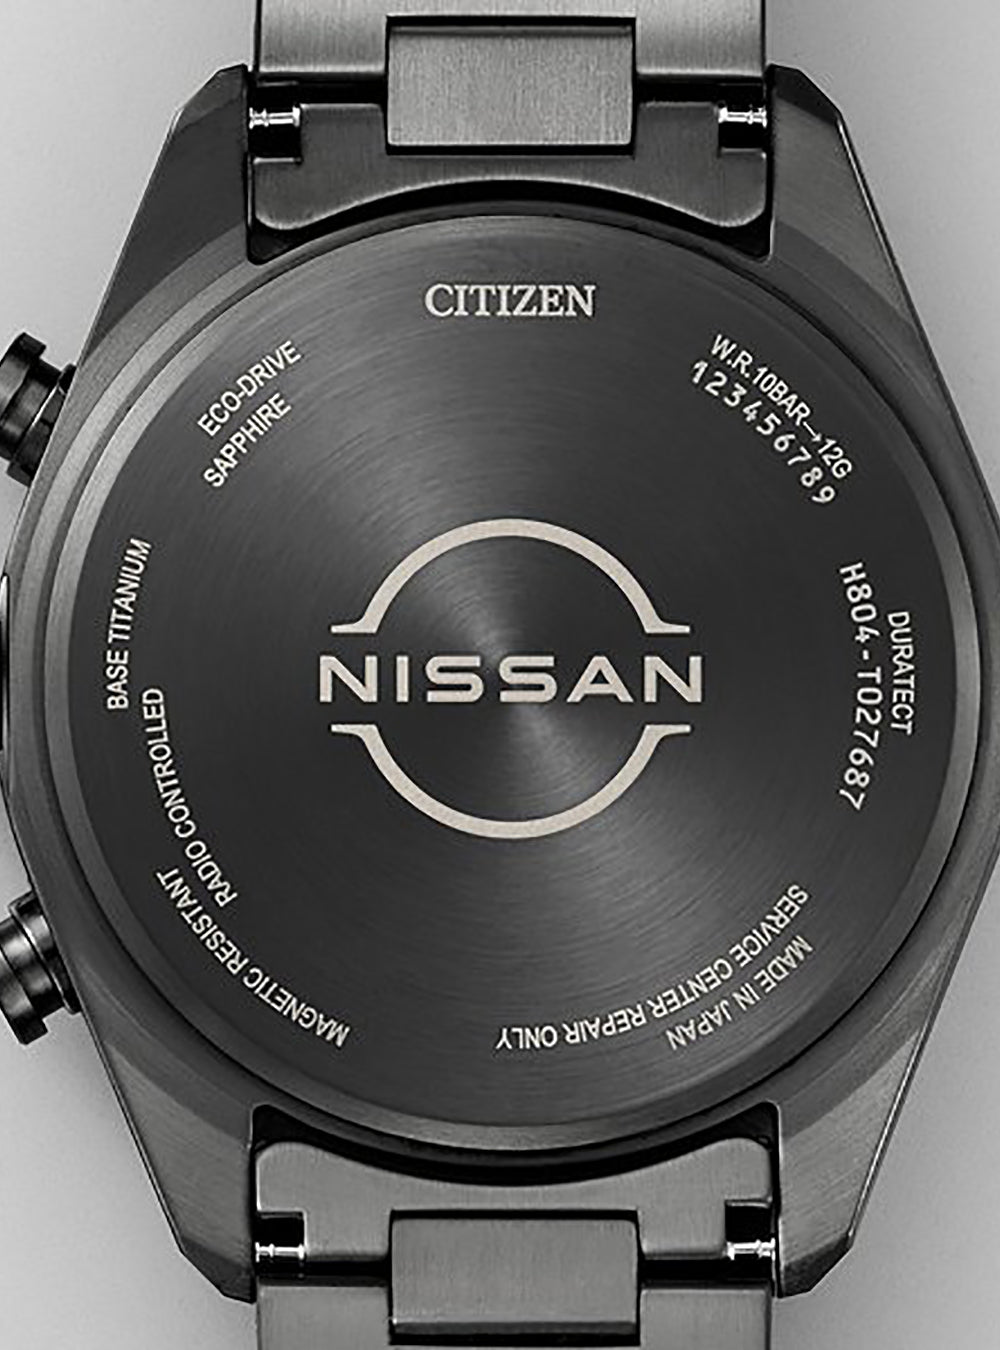 CITIZEN ATTESA ACT LINE NISSAN FAIRLADY Z COLLABORATION MODEL AT8185-97E LIMITED EDITION MADE IN JAPAN JDMWatchesjapan-select